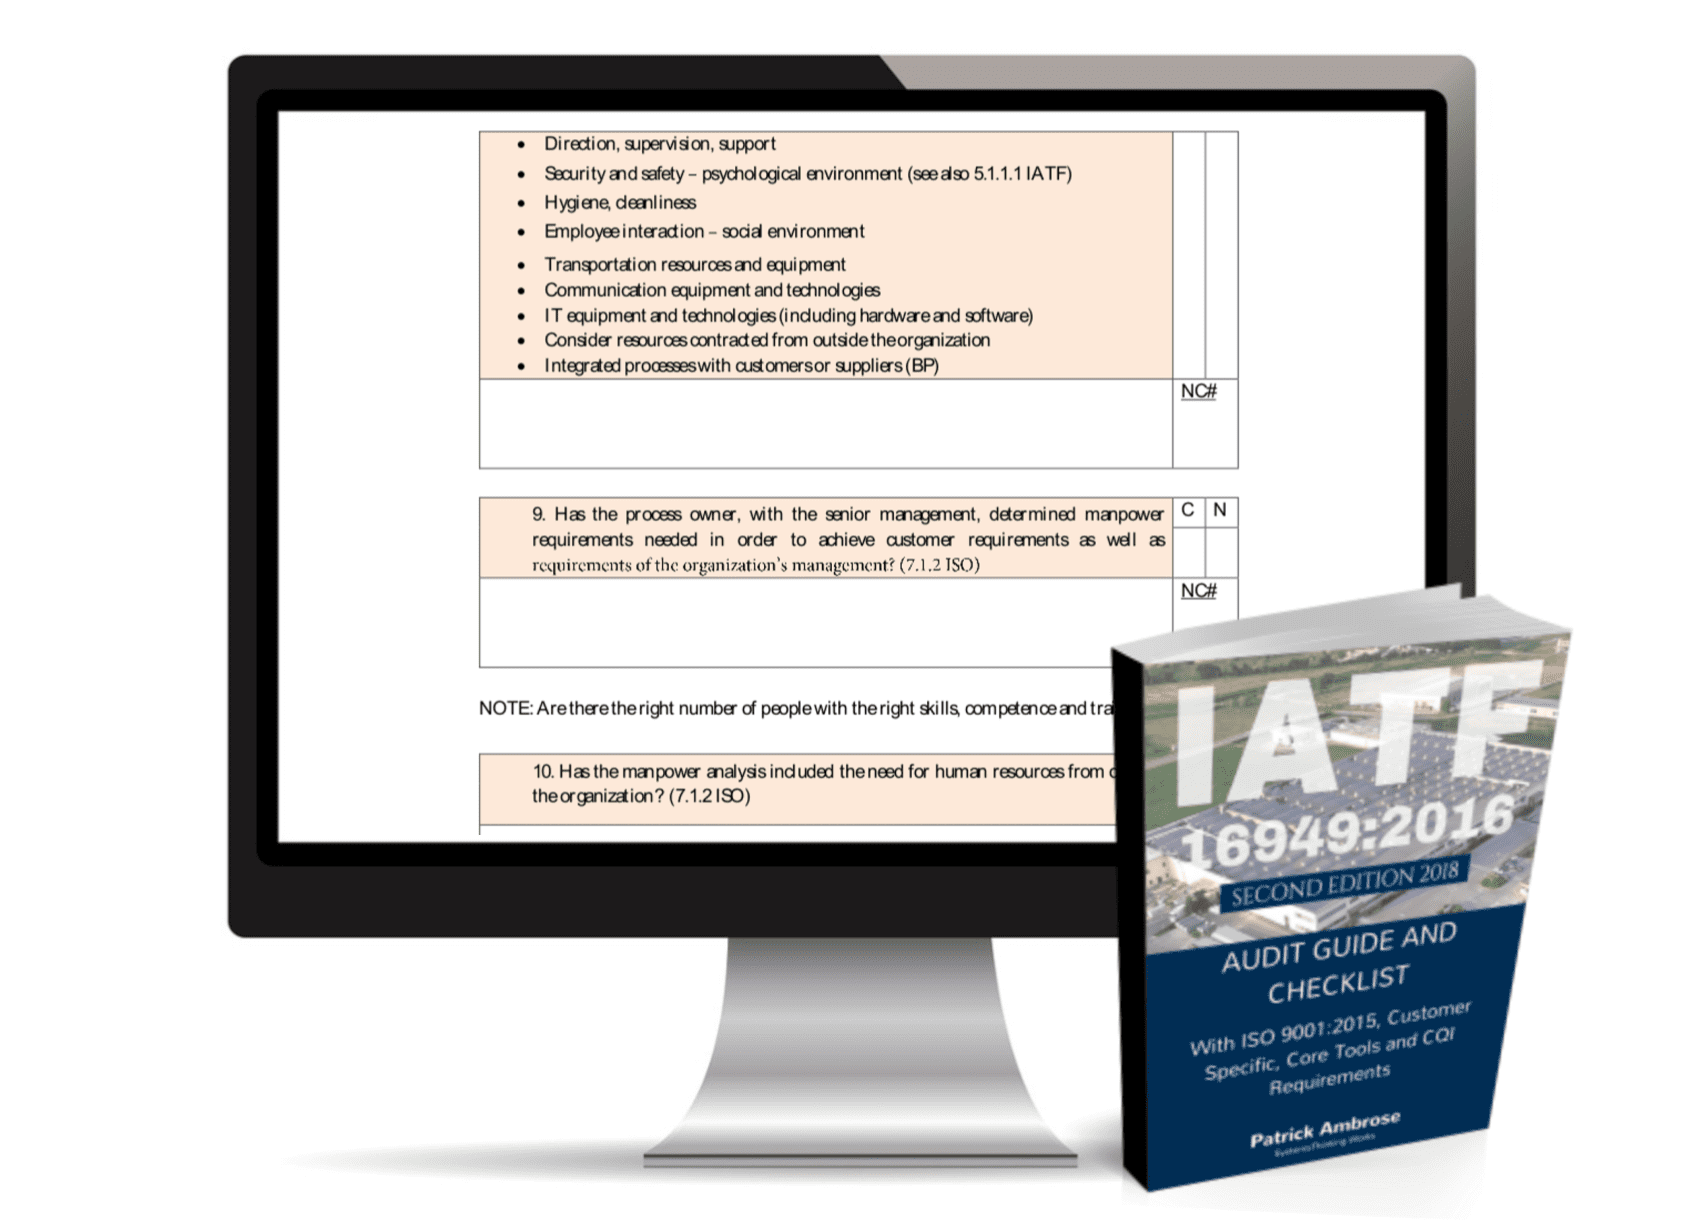 IATF Audit Guide and Checklist